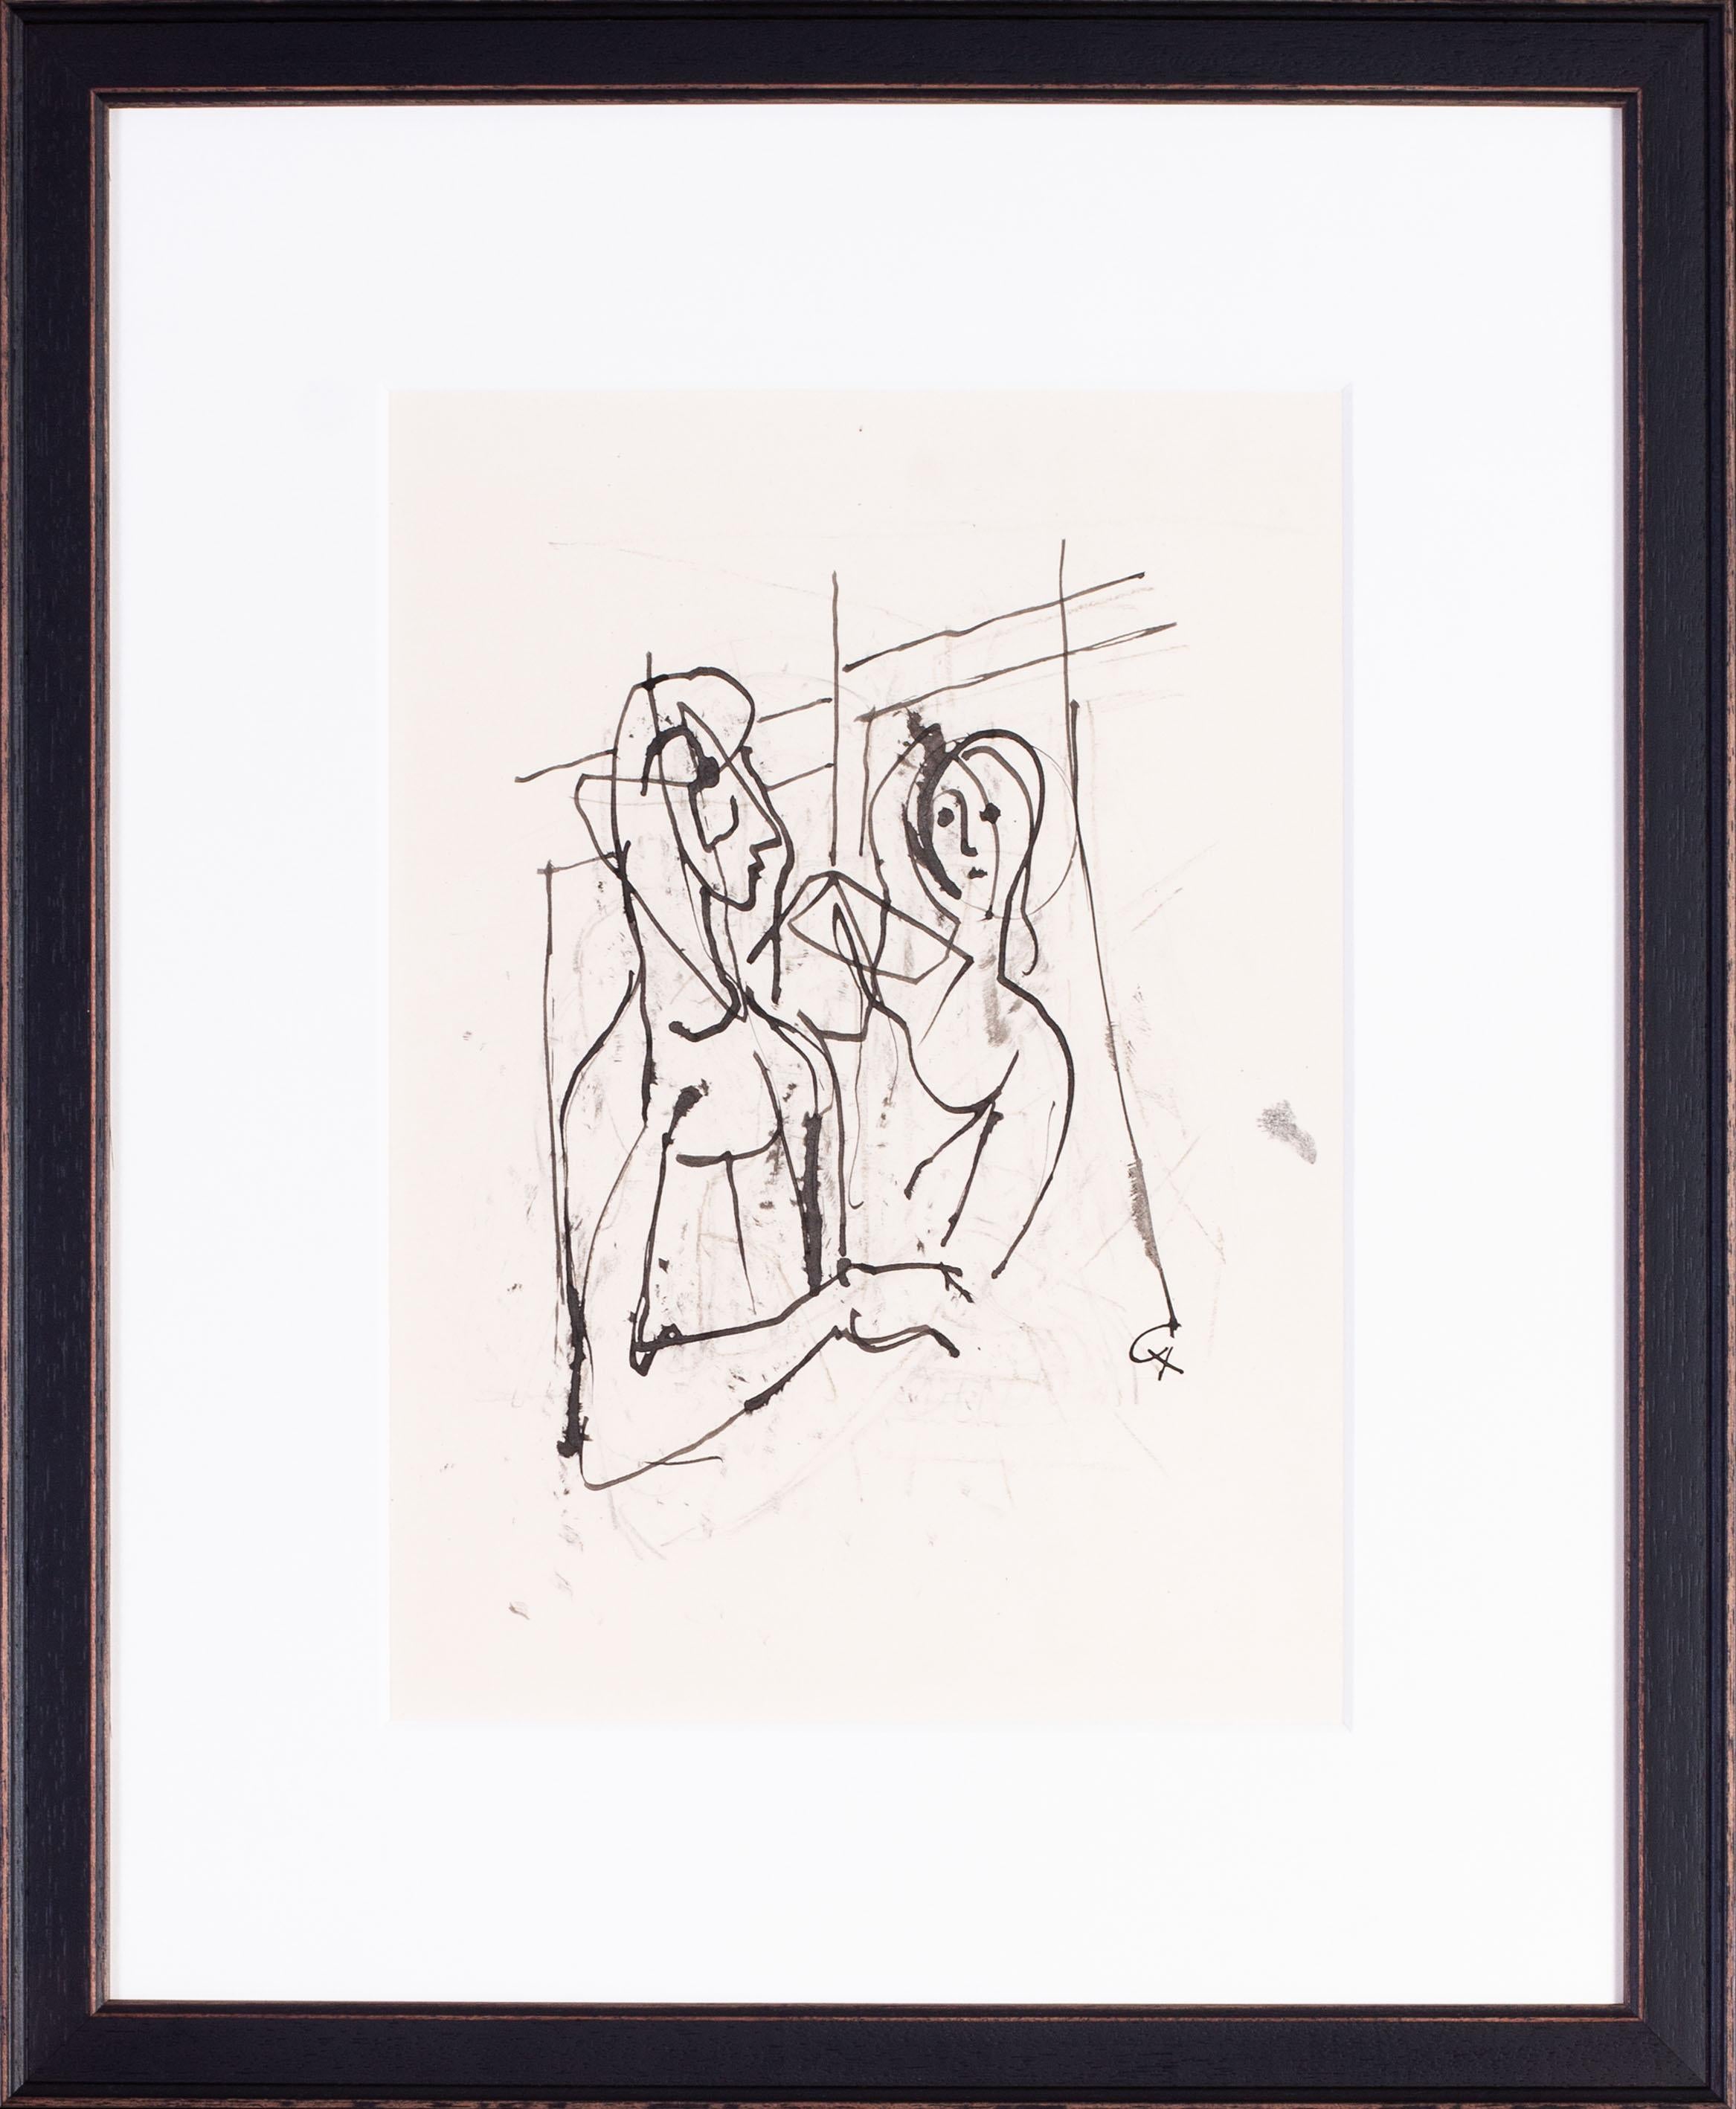 German Expressionist drawing by Carl Hofer of lovers